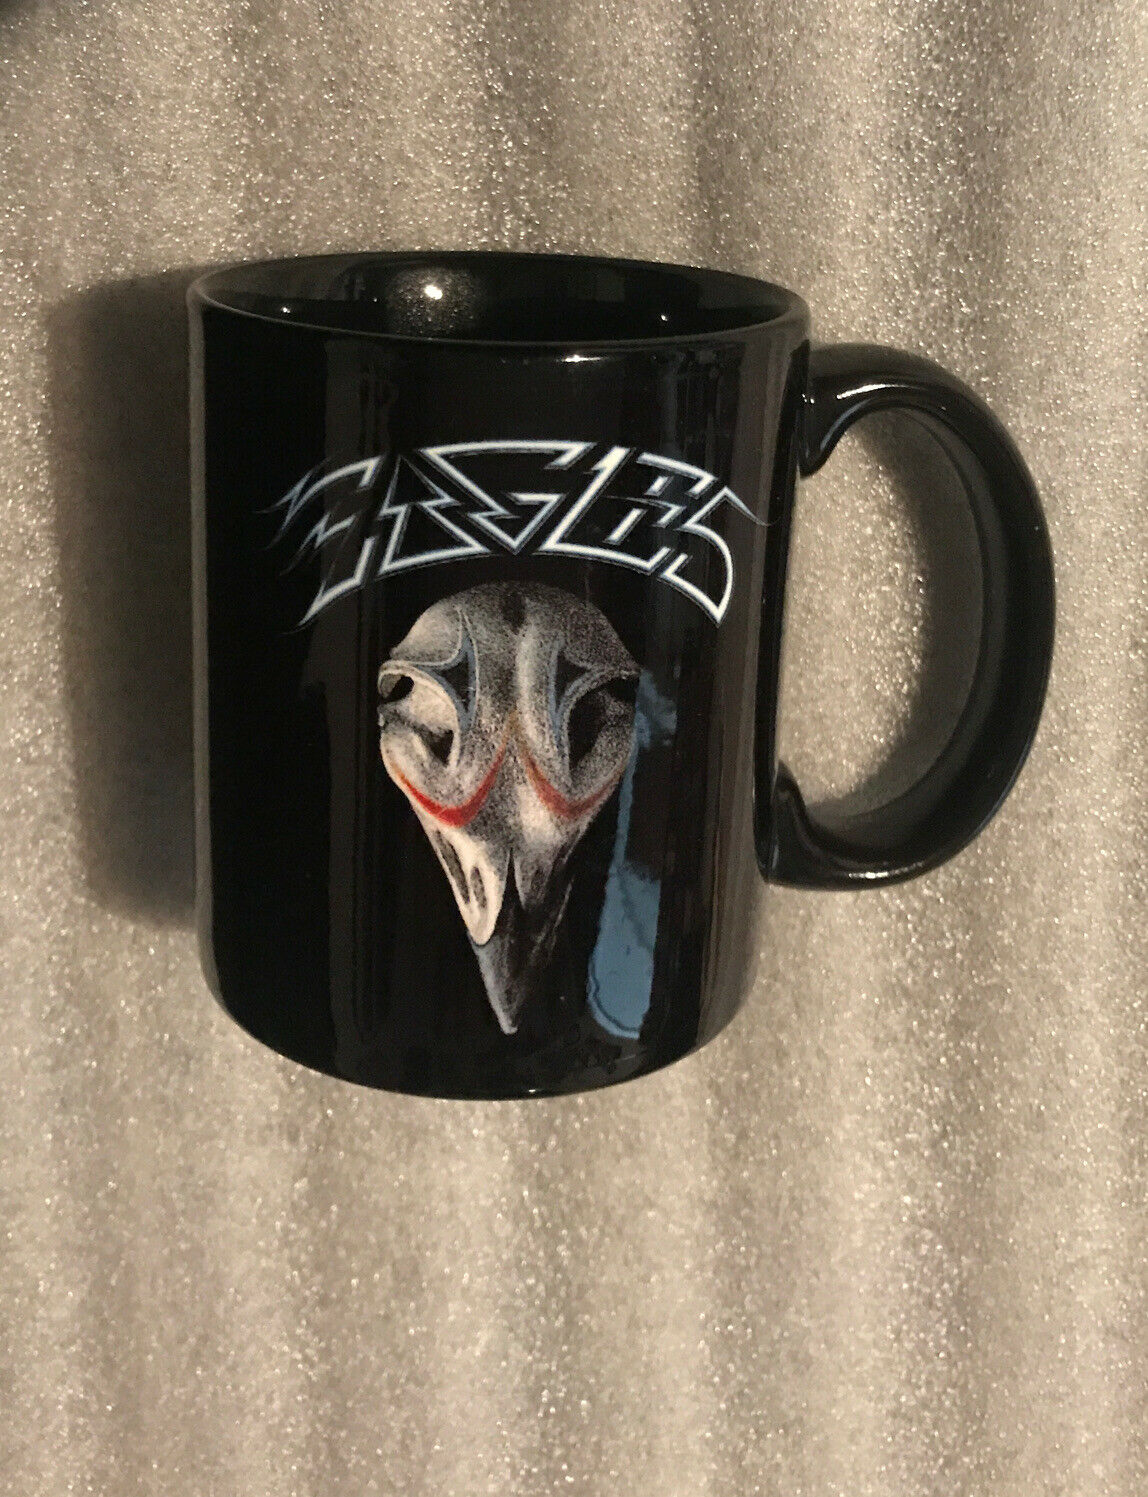 THE EAGLES  Mug Coffee Cup Black with Classic Logo 2-sides Country Rock Music